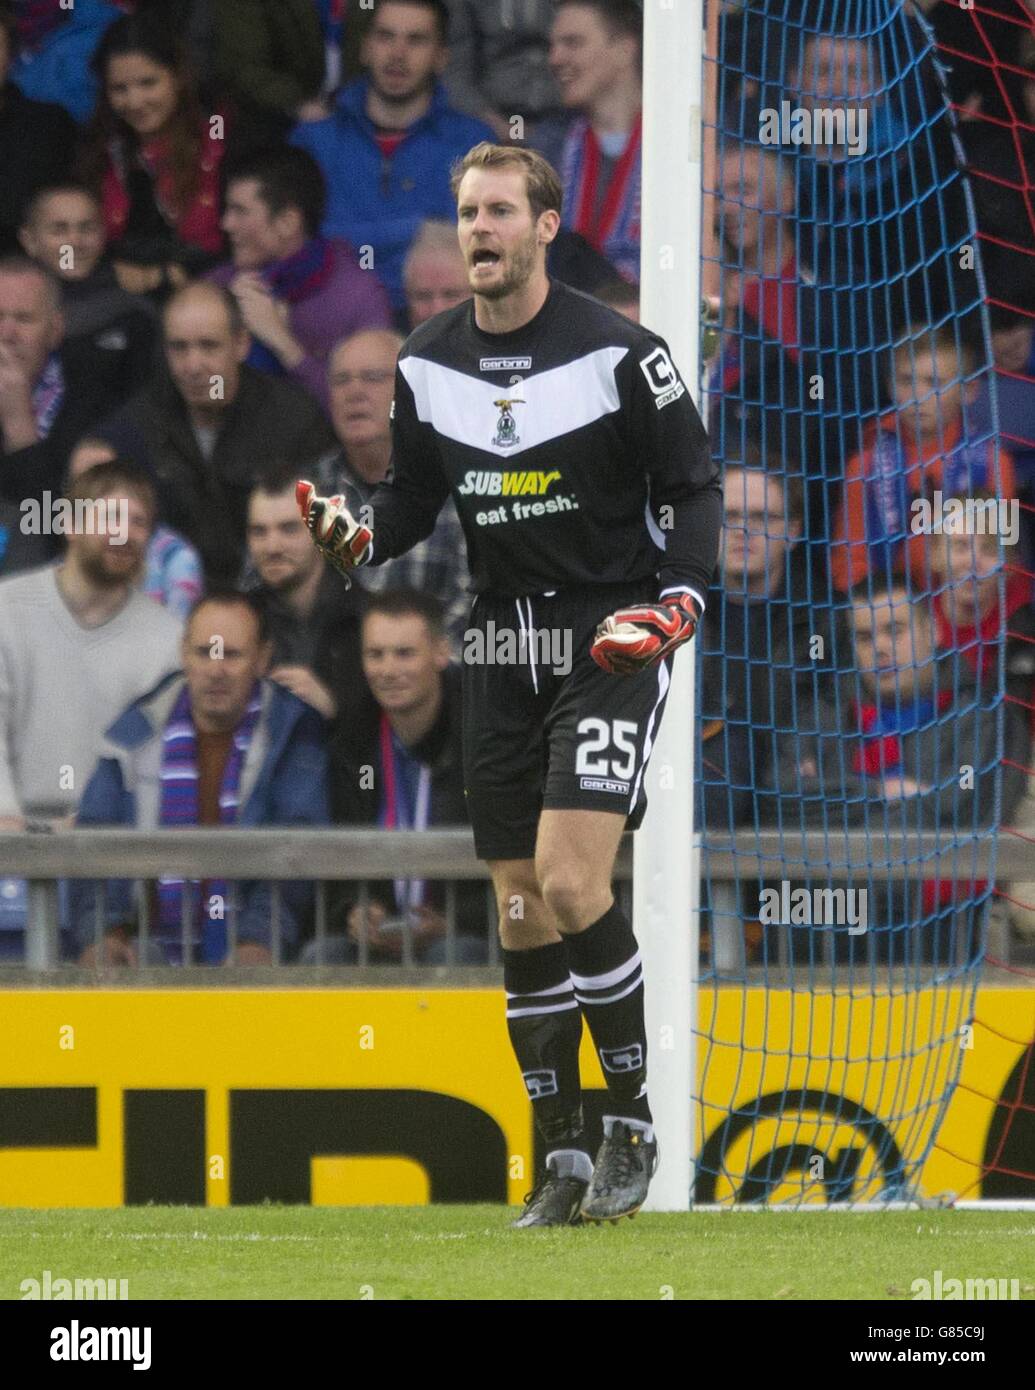 Inverness Caledonian Thistle goalkeeper Owain Fon Williams during the Europa League Second Qualifying Round, First Leg, at Caledonian Stadium, Inverness, Scotland. PRESS ASSOCIATION Photo. Picture date: Thursday July 16, 2015. See PA story SOCCER Inverness. Photo credit should read: Jeff Holmes/PA Wire. Stock Photo